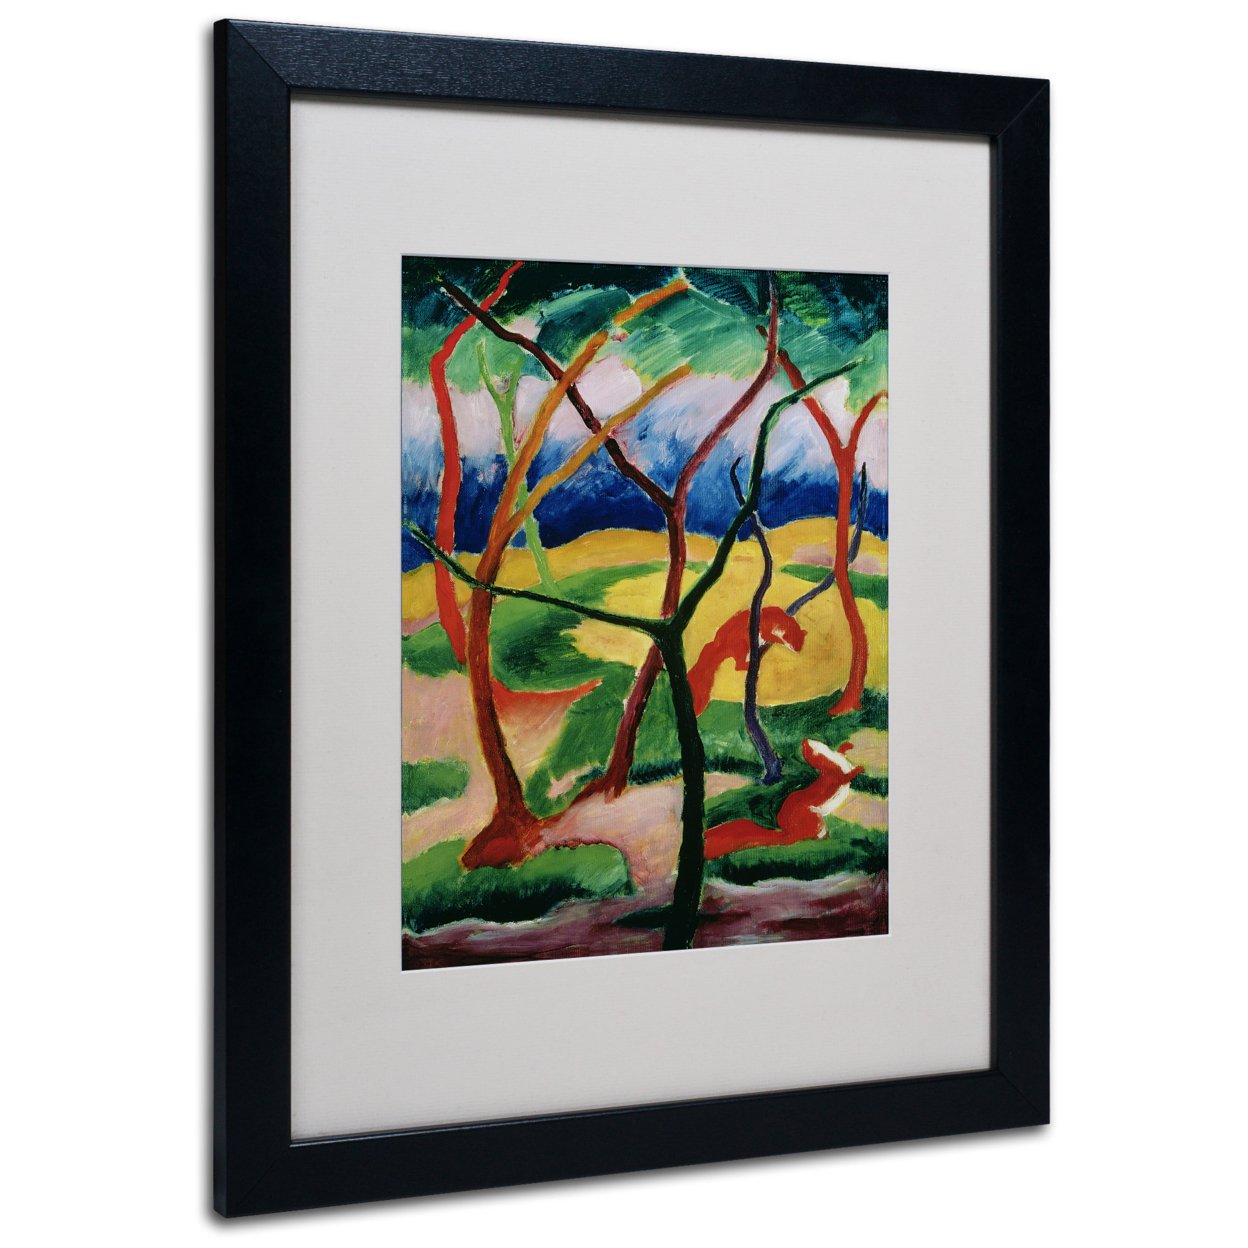 Franz Marc 'Weasels Playing 1911' Black Wooden Framed Art 18 X 22 Inches